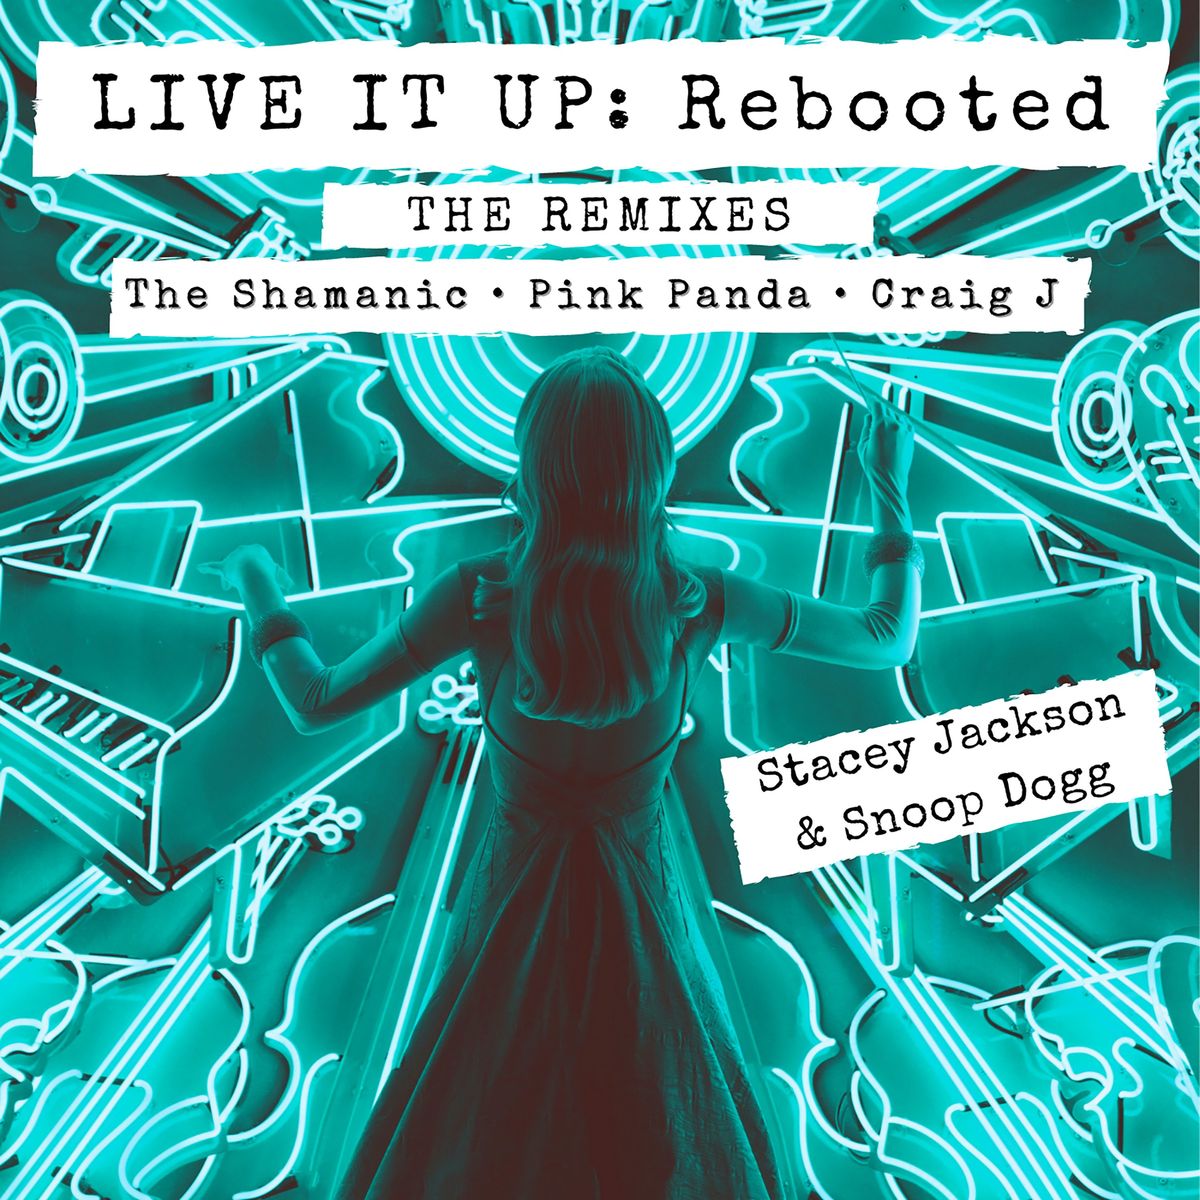 Stacey Jackson ft Snoop Dogg - Live It Up (Rebooted) (Craig J Electro Love Remix)